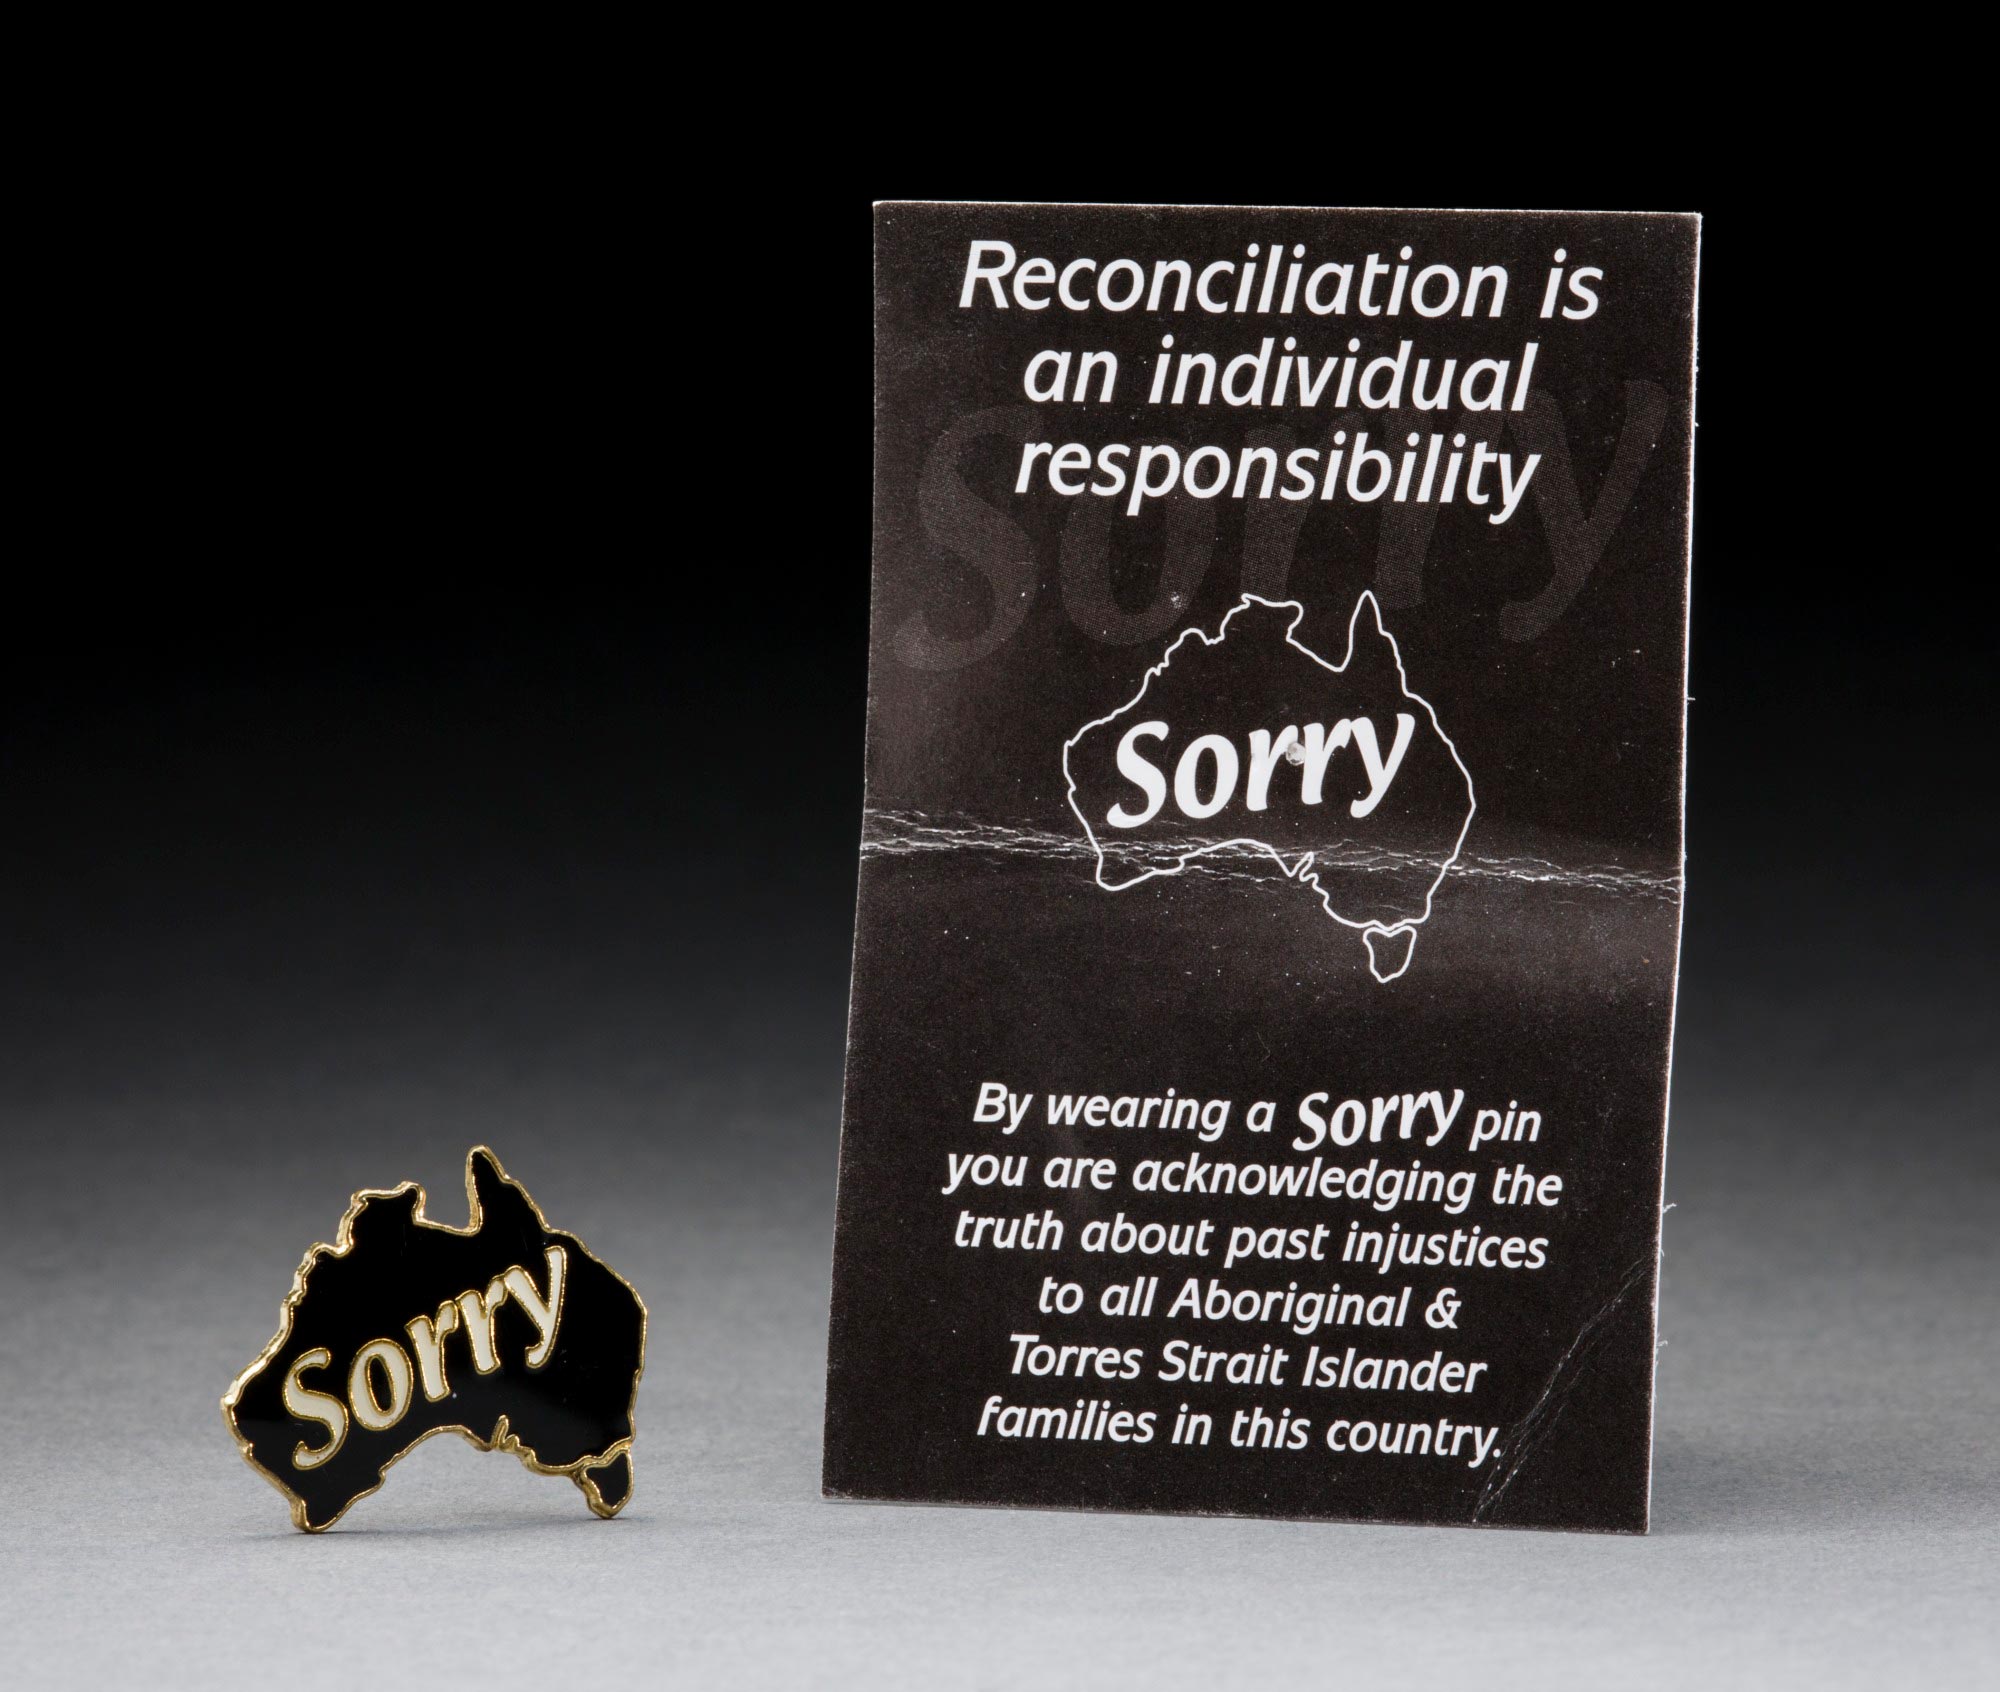 Sorry badge and card produced by Link-Up.